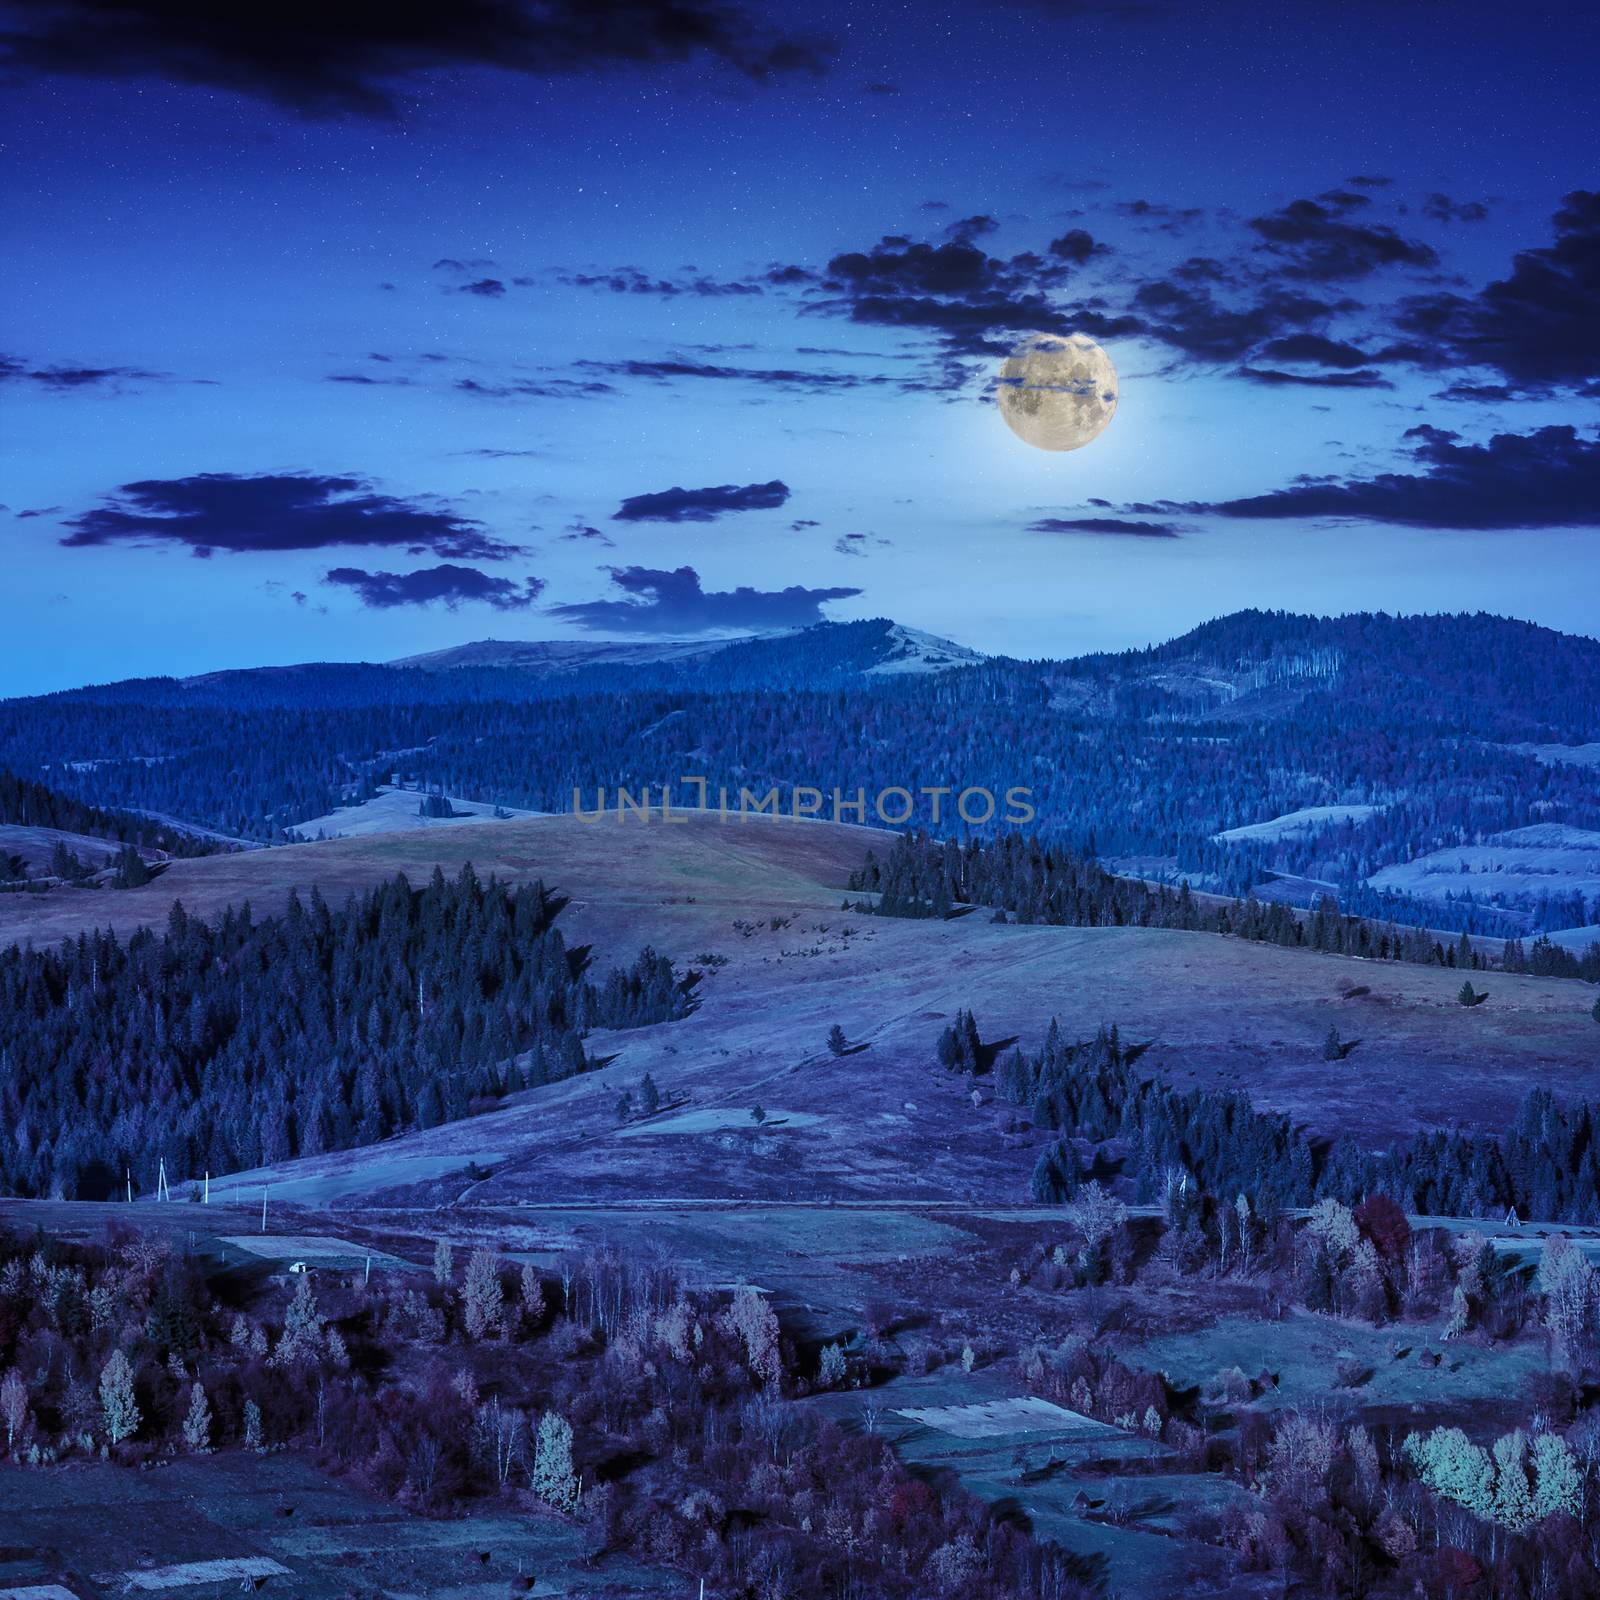  mountain steep slope with coniferous forest in moon light at midnight